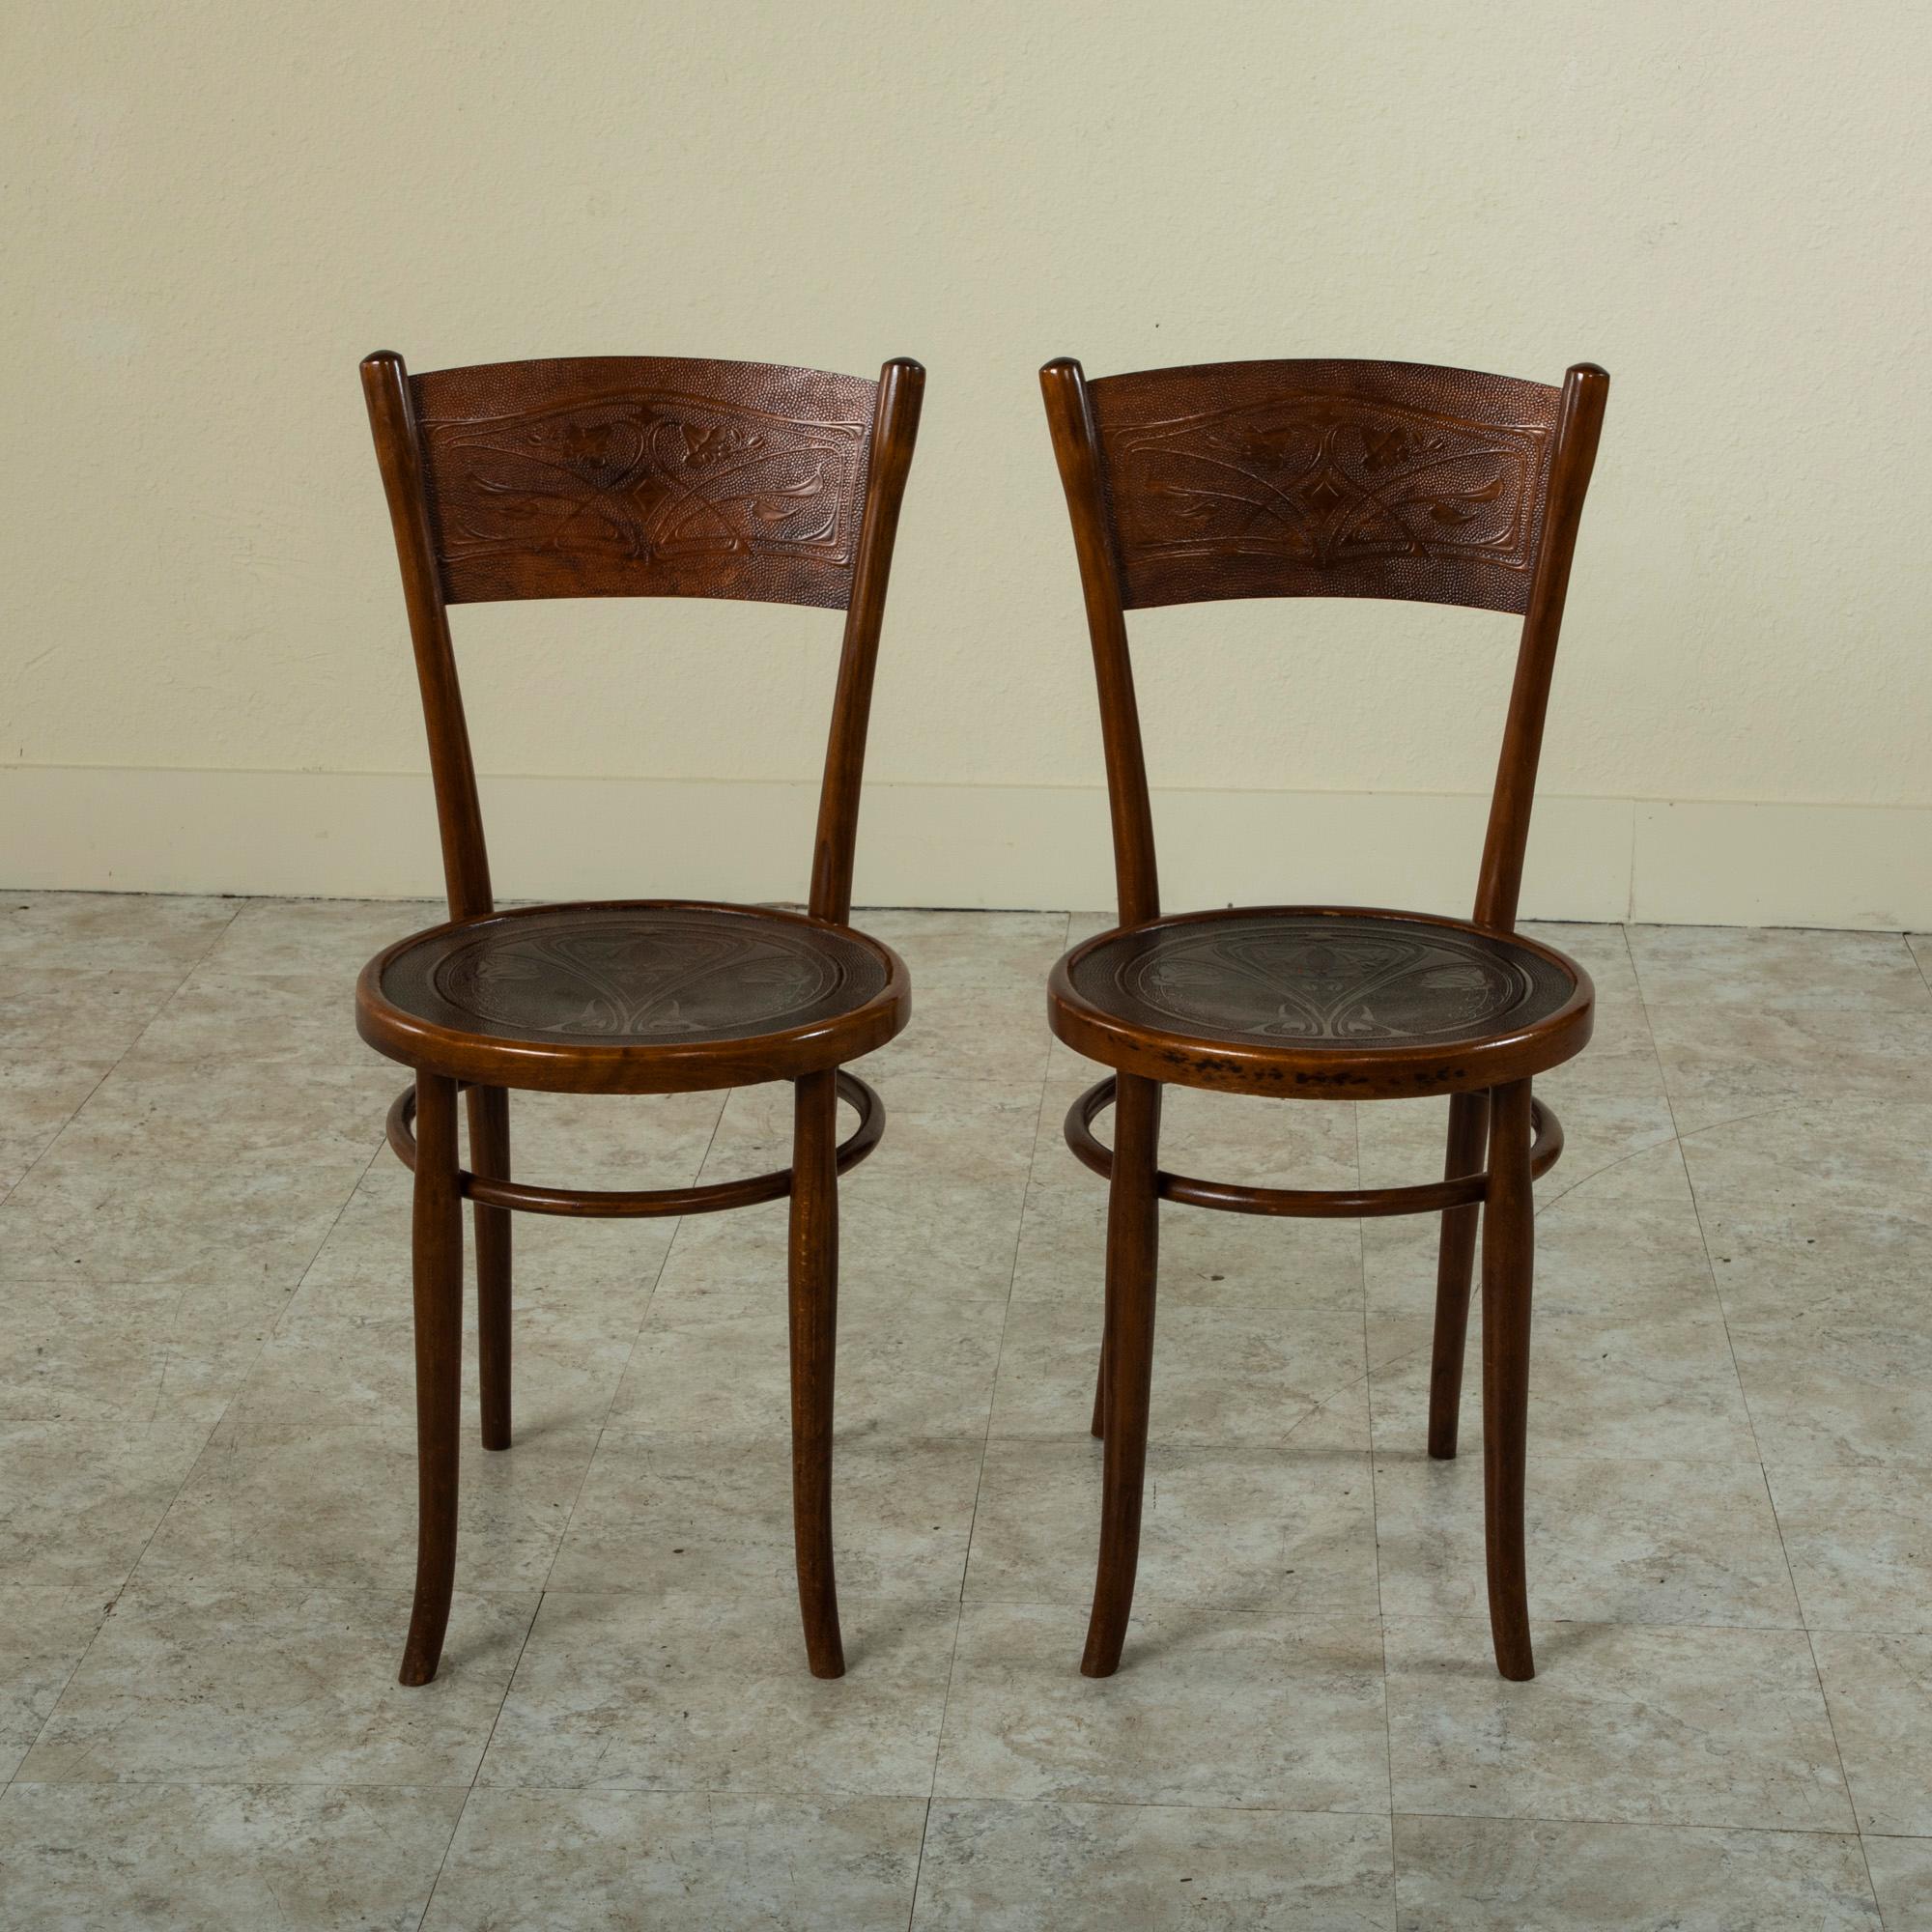 This pair of French Art Nouveau period bentwood bistro chairs features pressed wood seats and seat backs detailed with classic stylized lilies and scrolling leaves. The seats rest on gently curved legs joined by a circular support. The chairs bear